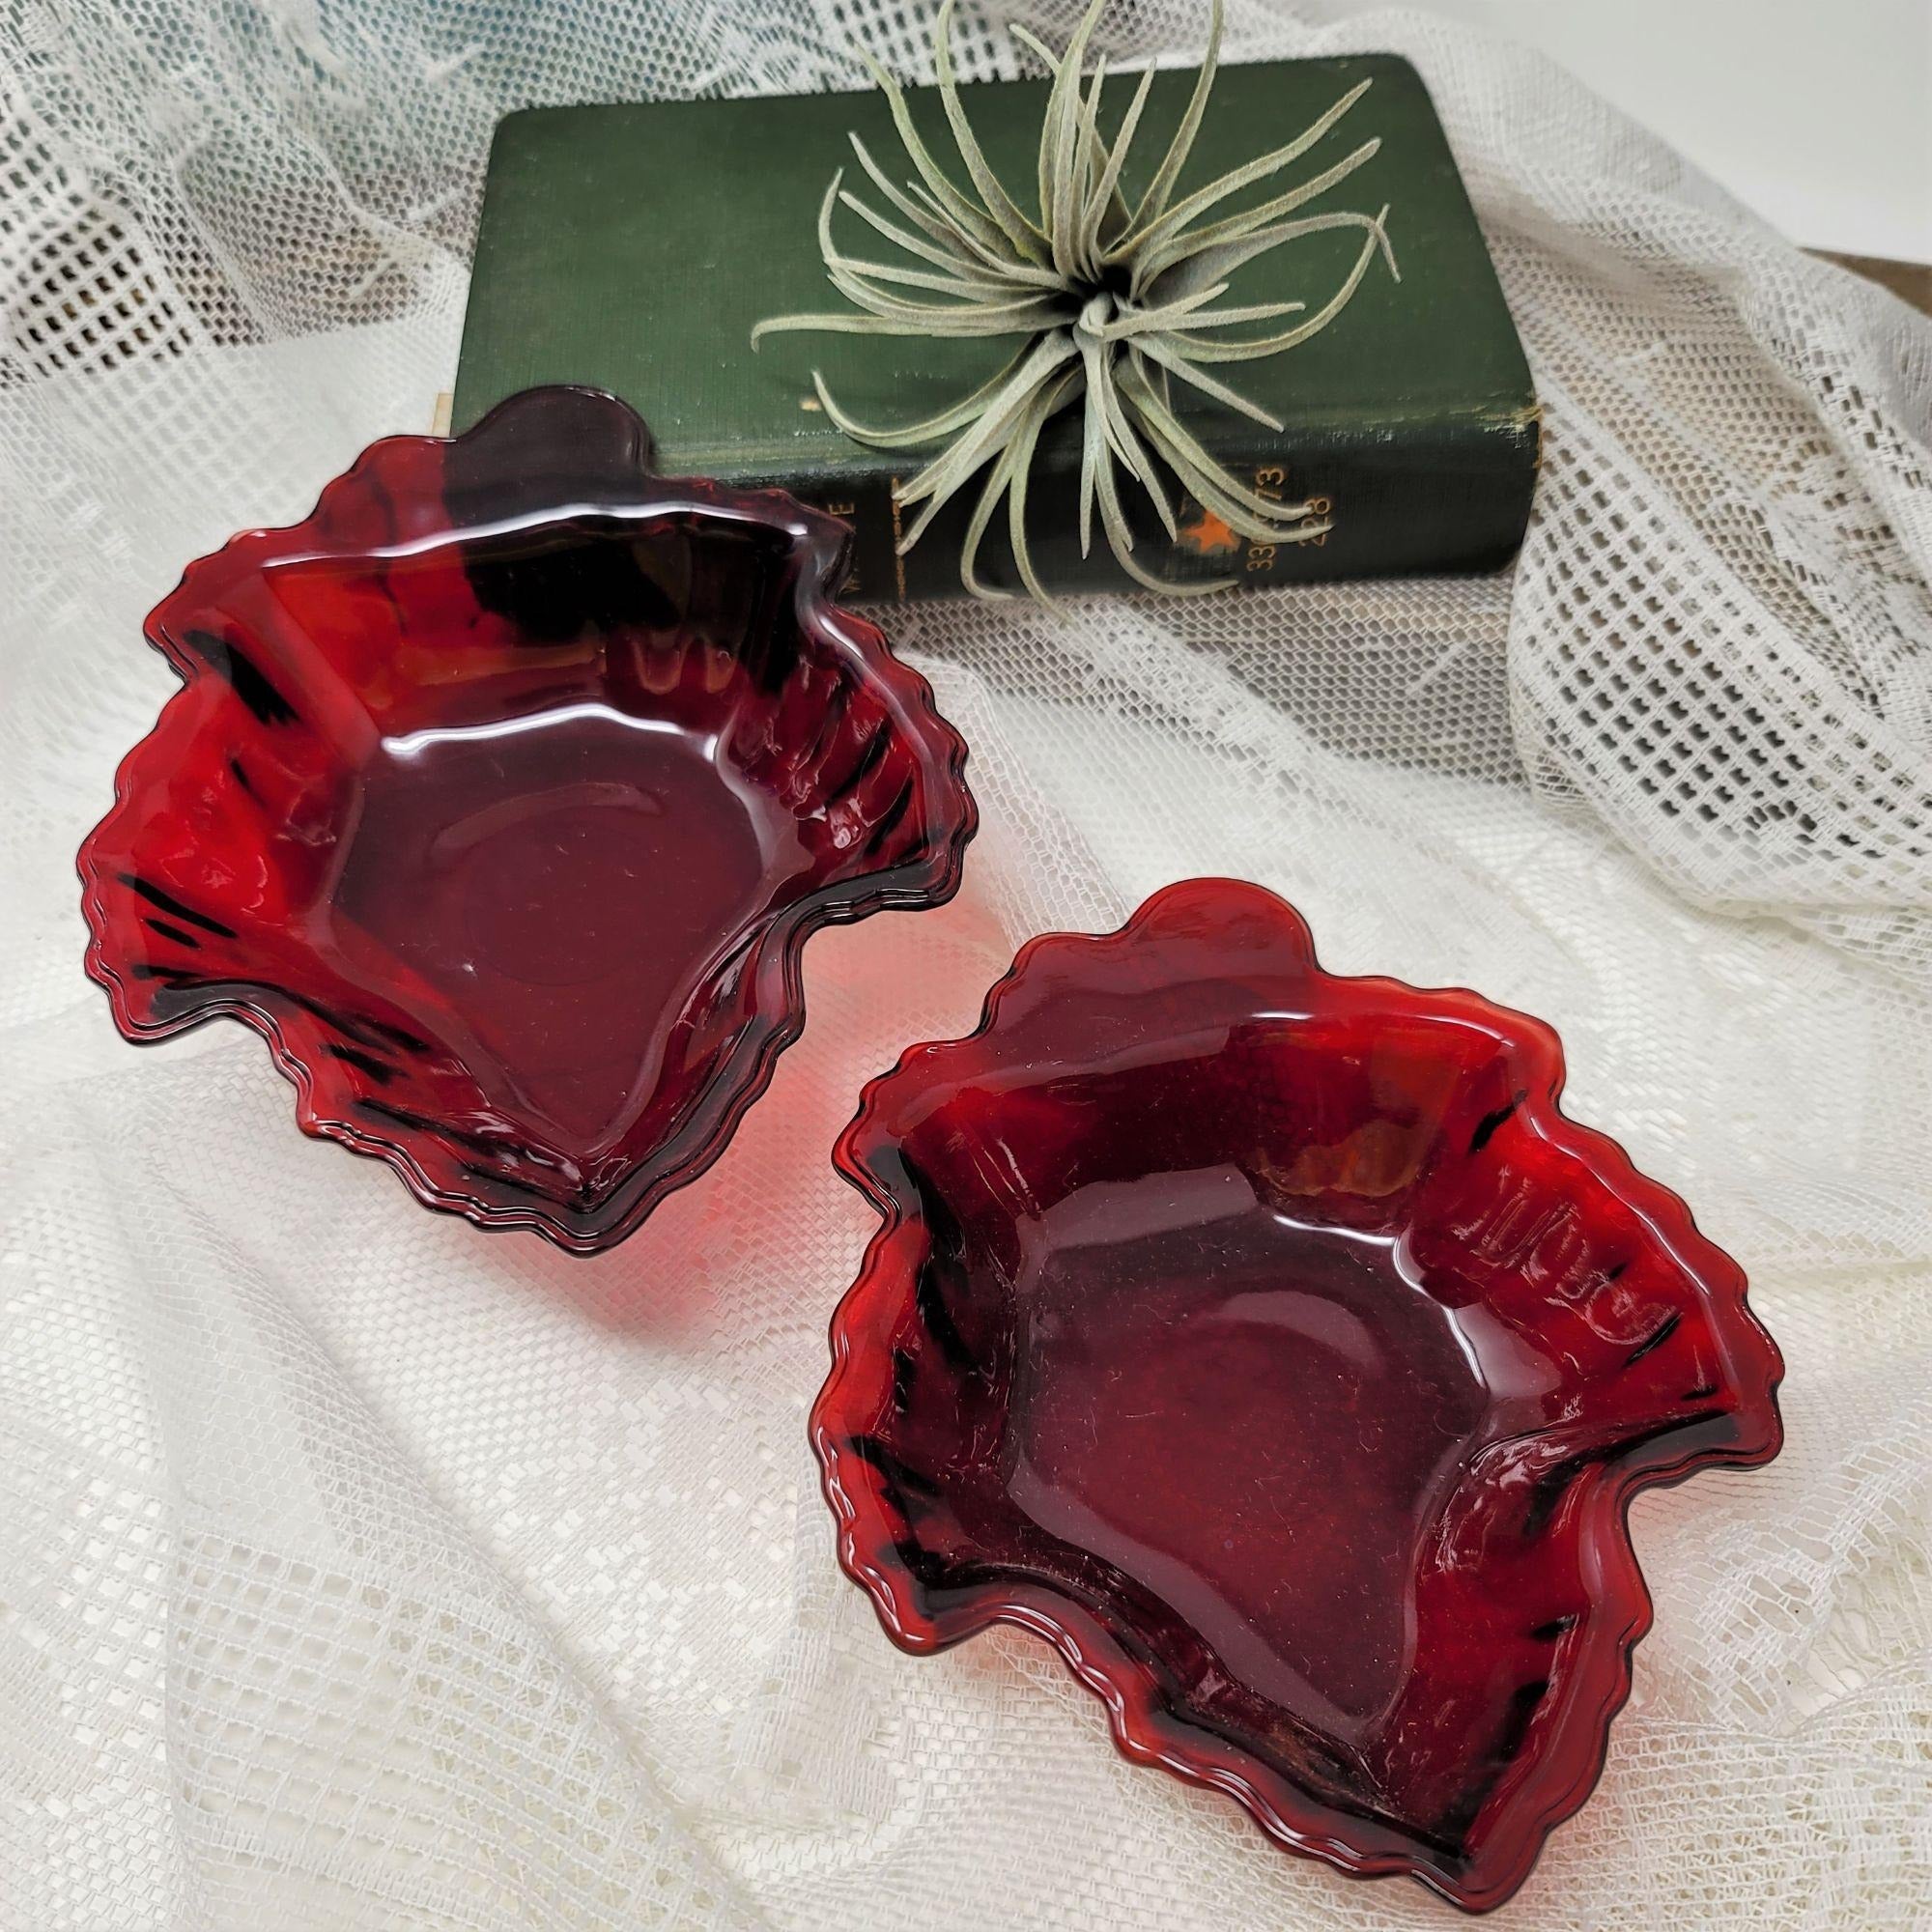 Anchor Hocking Ruby Red Glass Maple Leaf Candy Dish. Set of 2